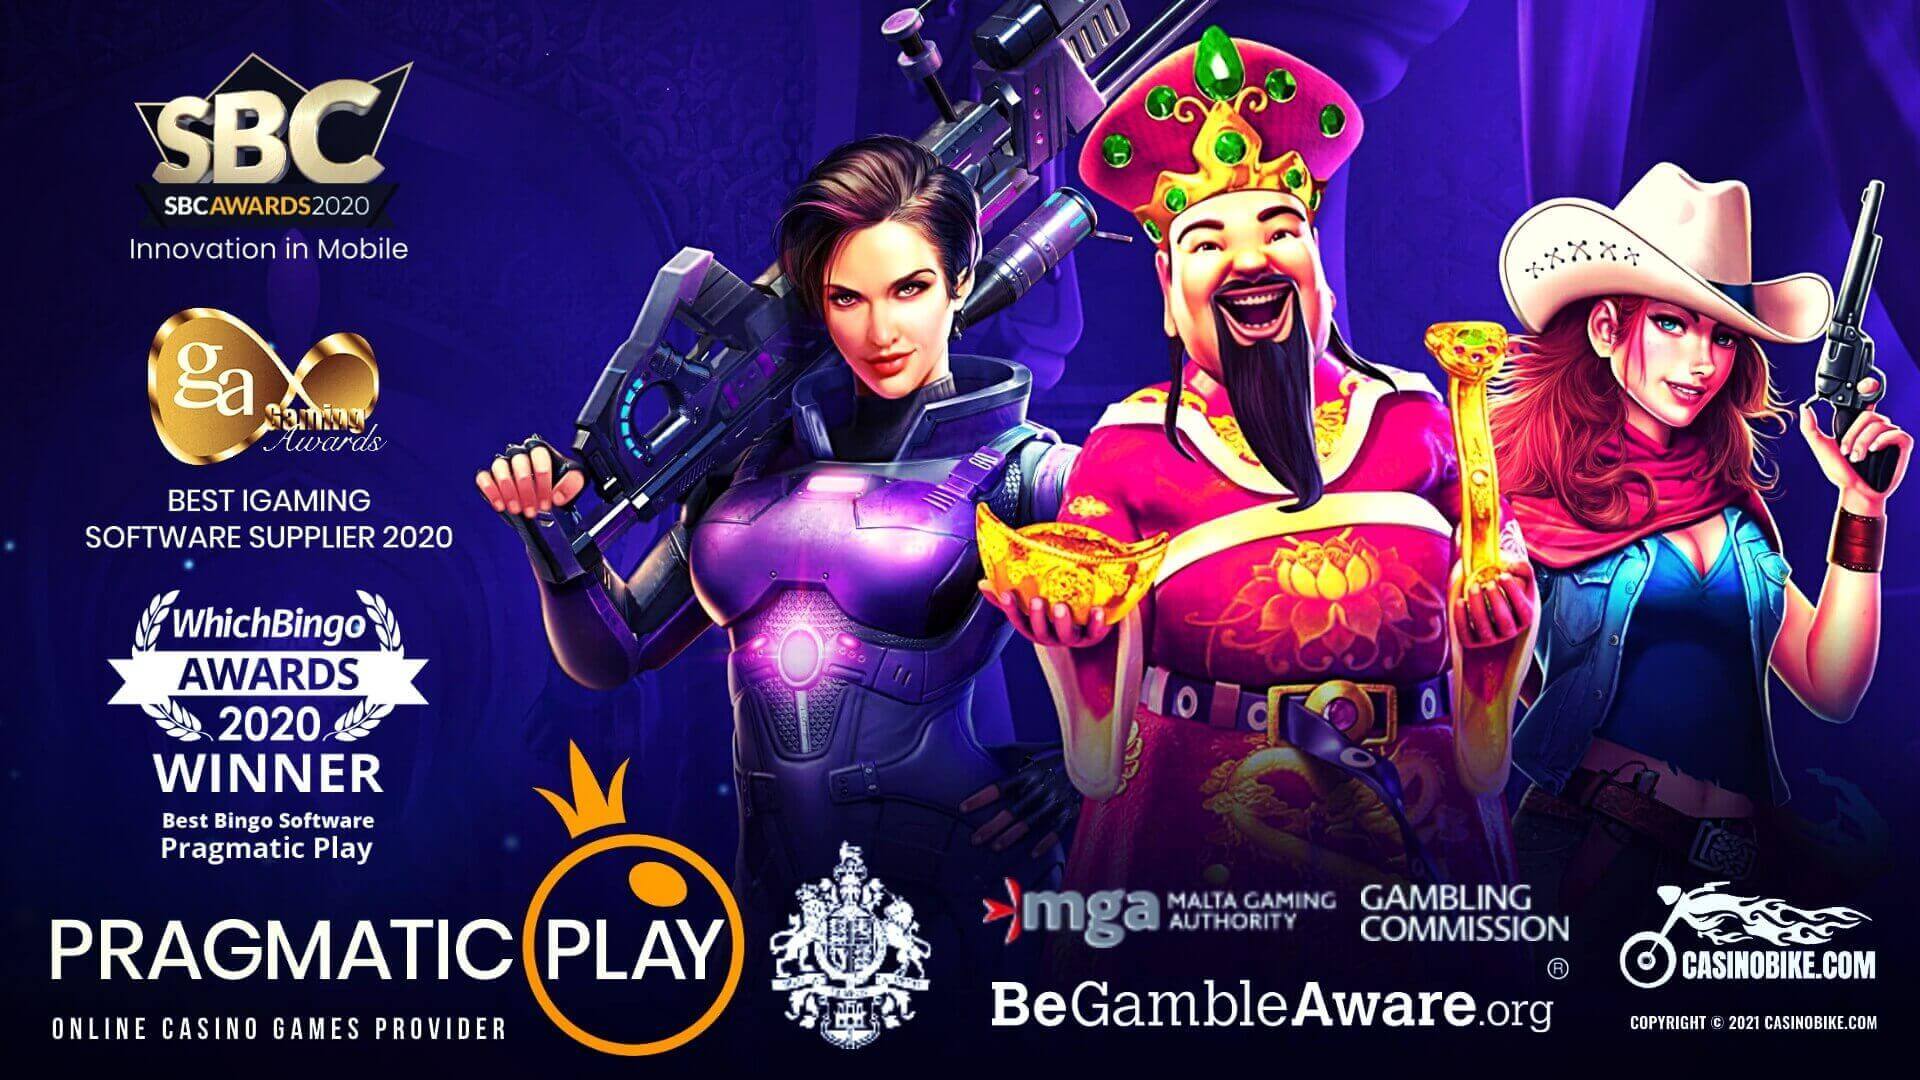 Review of Best Casino Software and Slots Provider Pragmatic Play